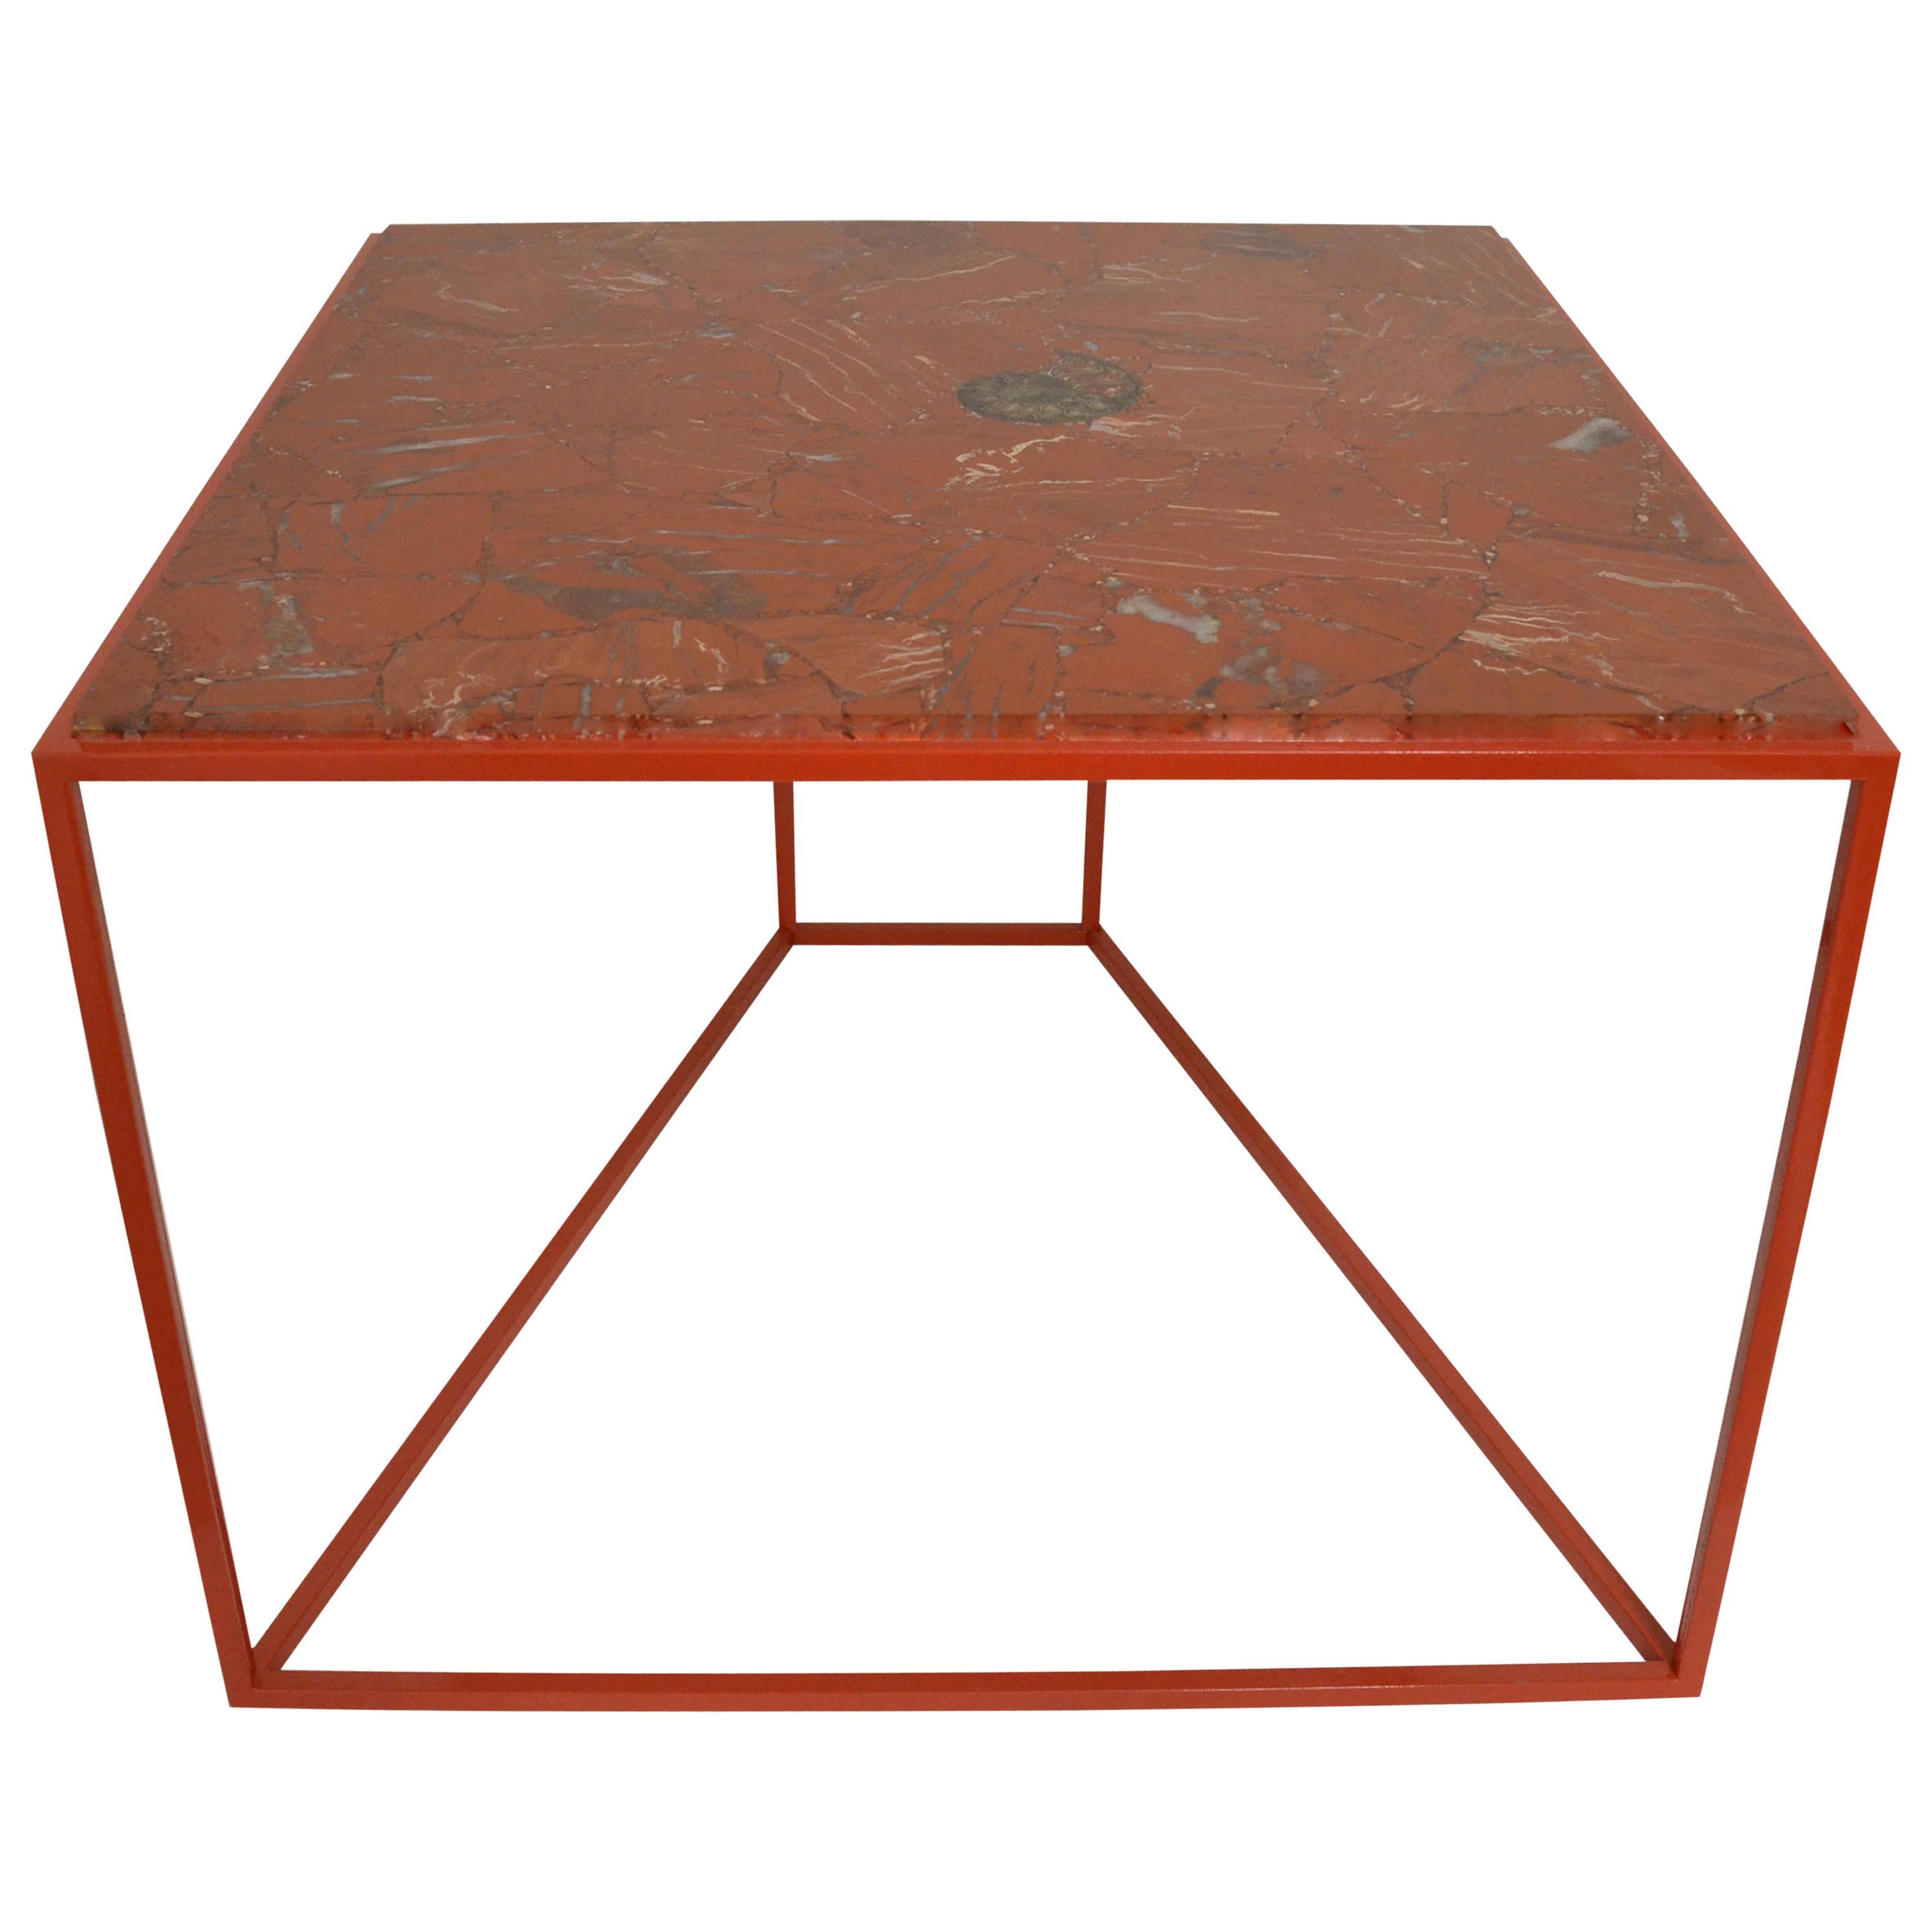 'Cubic' Square Red Jasper Gemstone Cocktail / Coffee / Centre Table For Sale